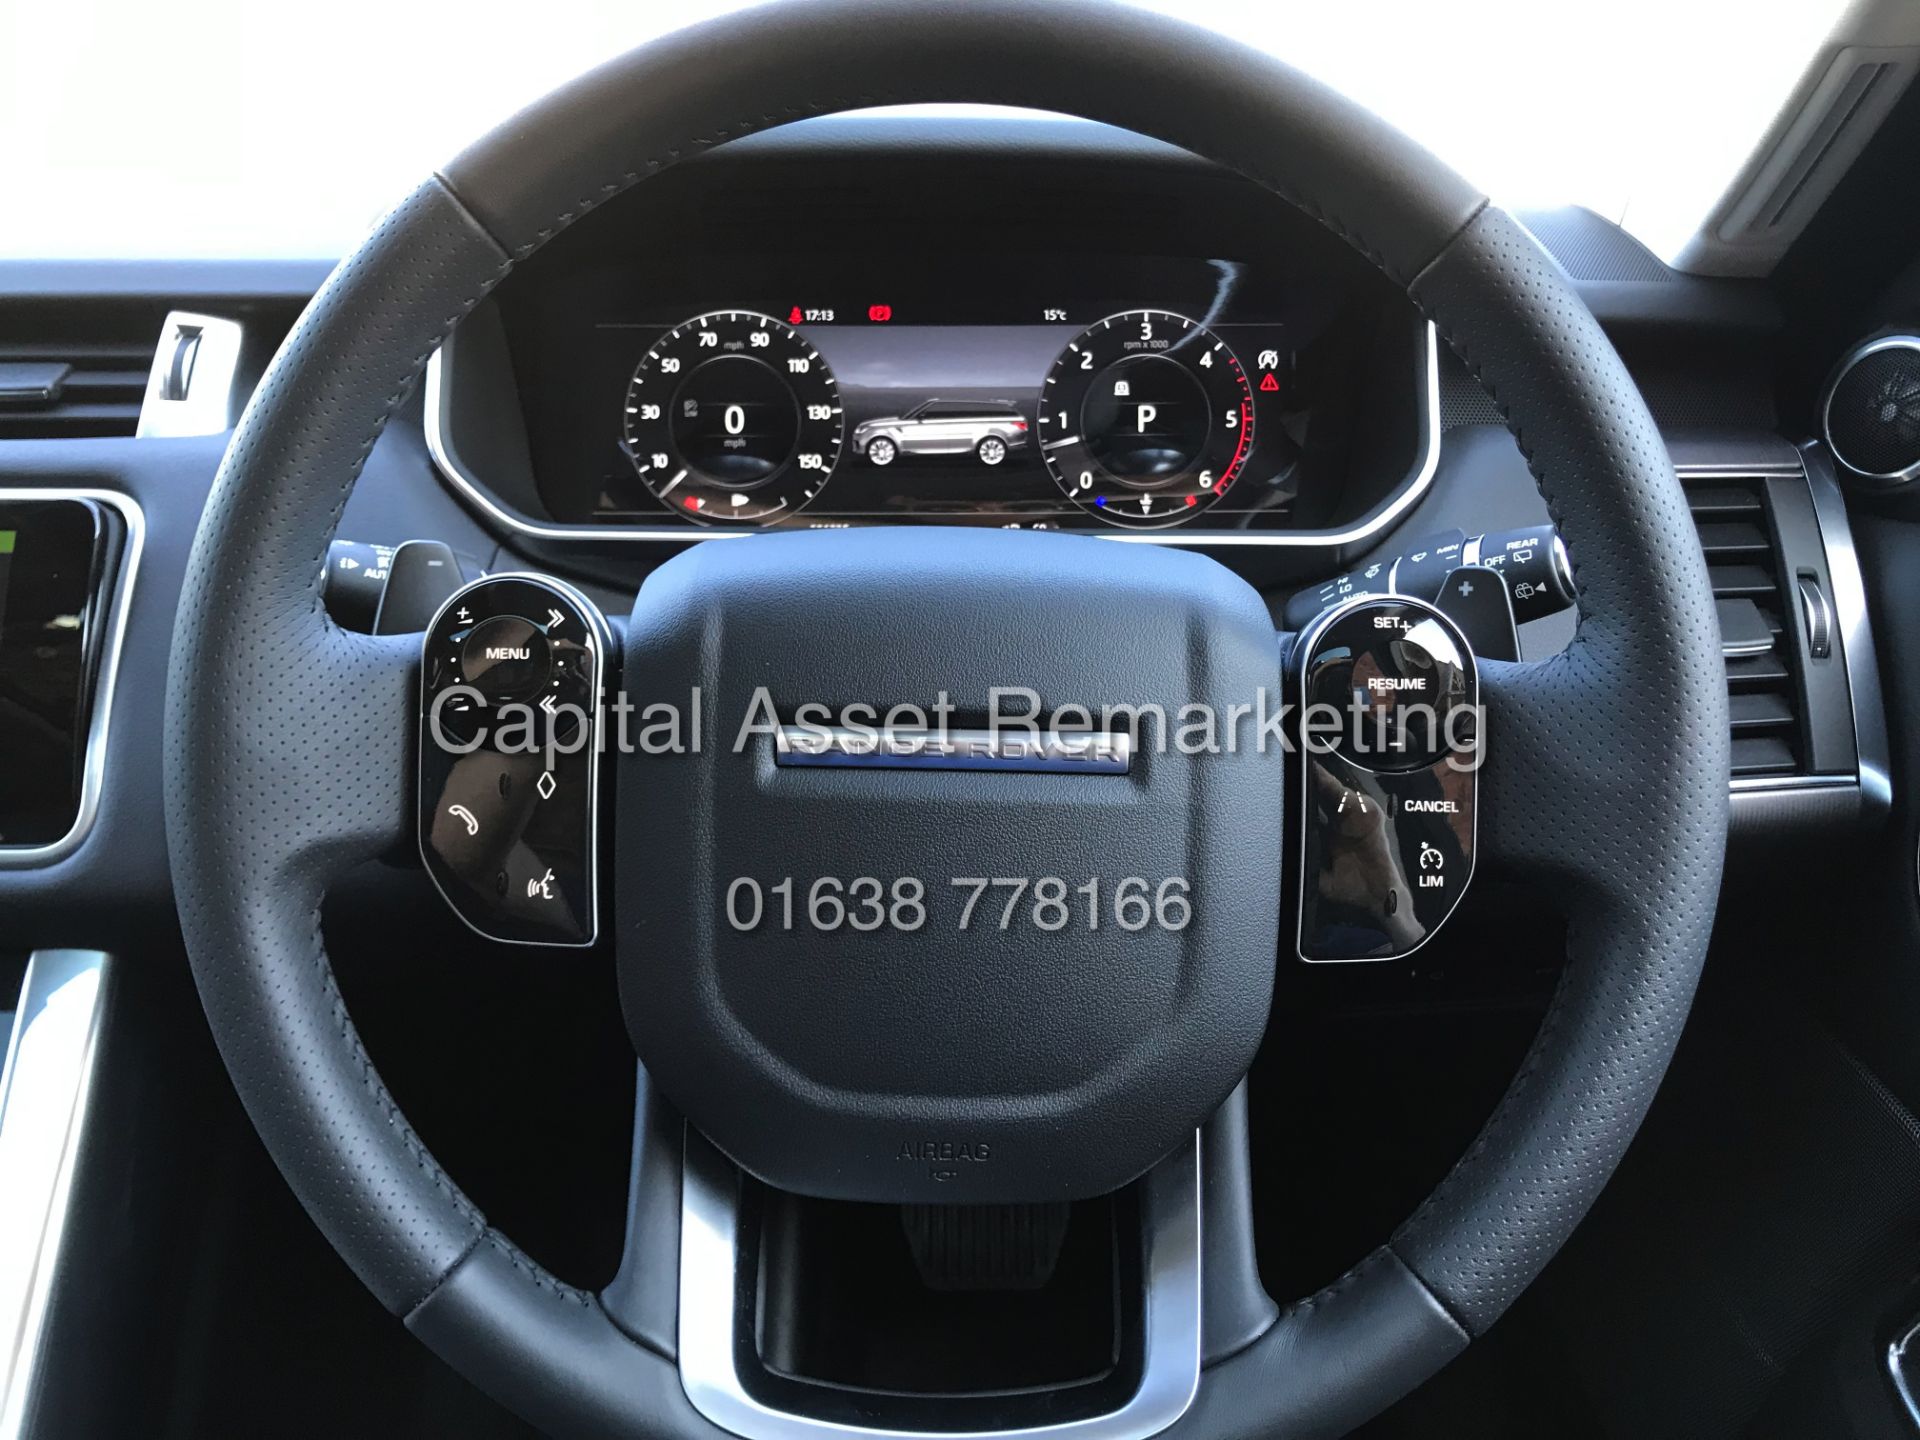 On Sale RANGE ROVER SPORT "HSE" 3.0 SDV6 AUTO (2019) FULLY LOADED - SAT NAV - PAN ROOF- FULL LEATHER - Image 20 of 35